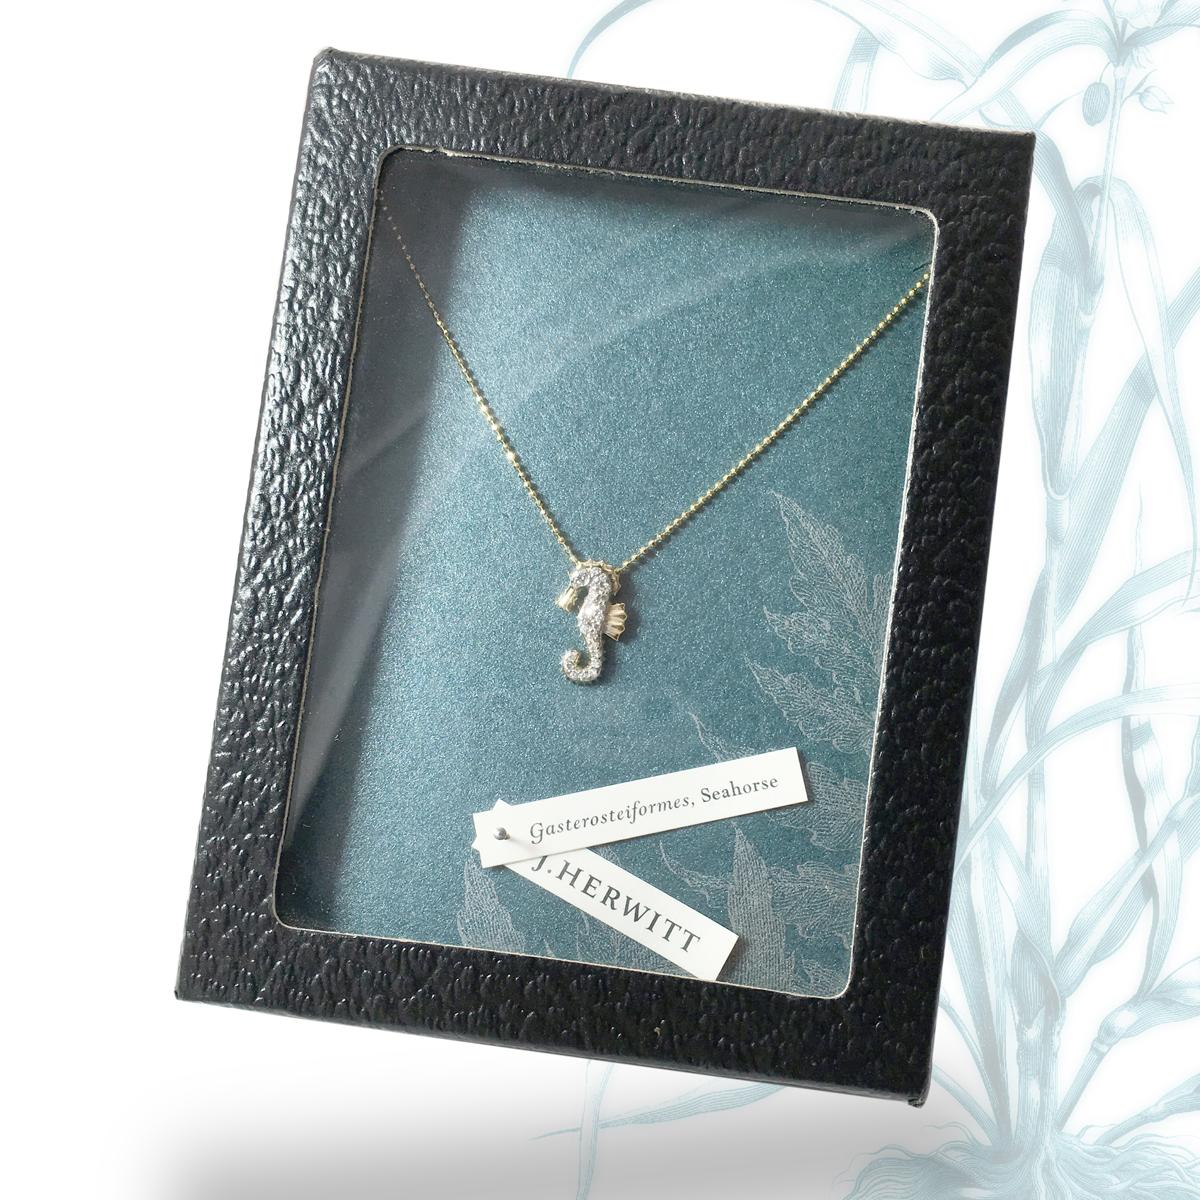 By Special Order only
Introducing our exquisite Small Seahorse Diamond Pendant in Yellow Gold. With its undeniable charm, this pendant instantly transports you to the graceful movements of a seahorse amidst waves of sea grass.

This limited edition